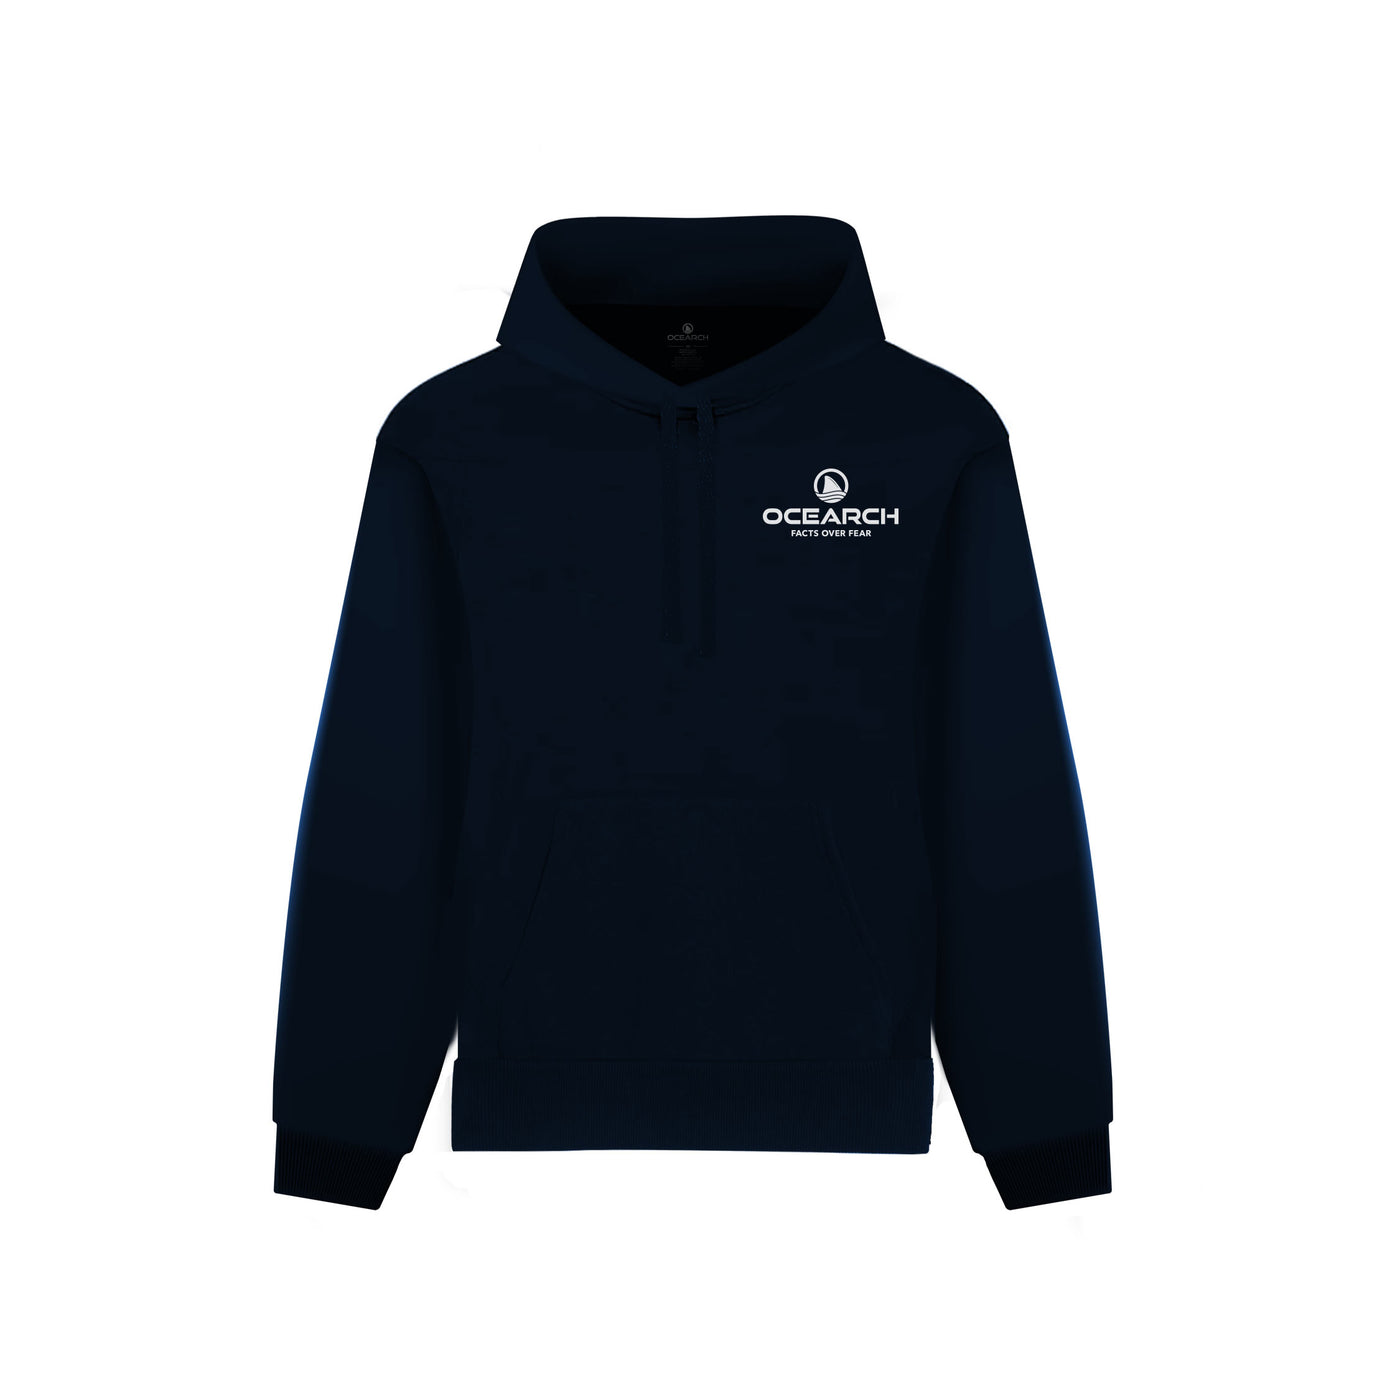 OCEARCH 45th Expedition Hoodie | Official OCEARCH Store